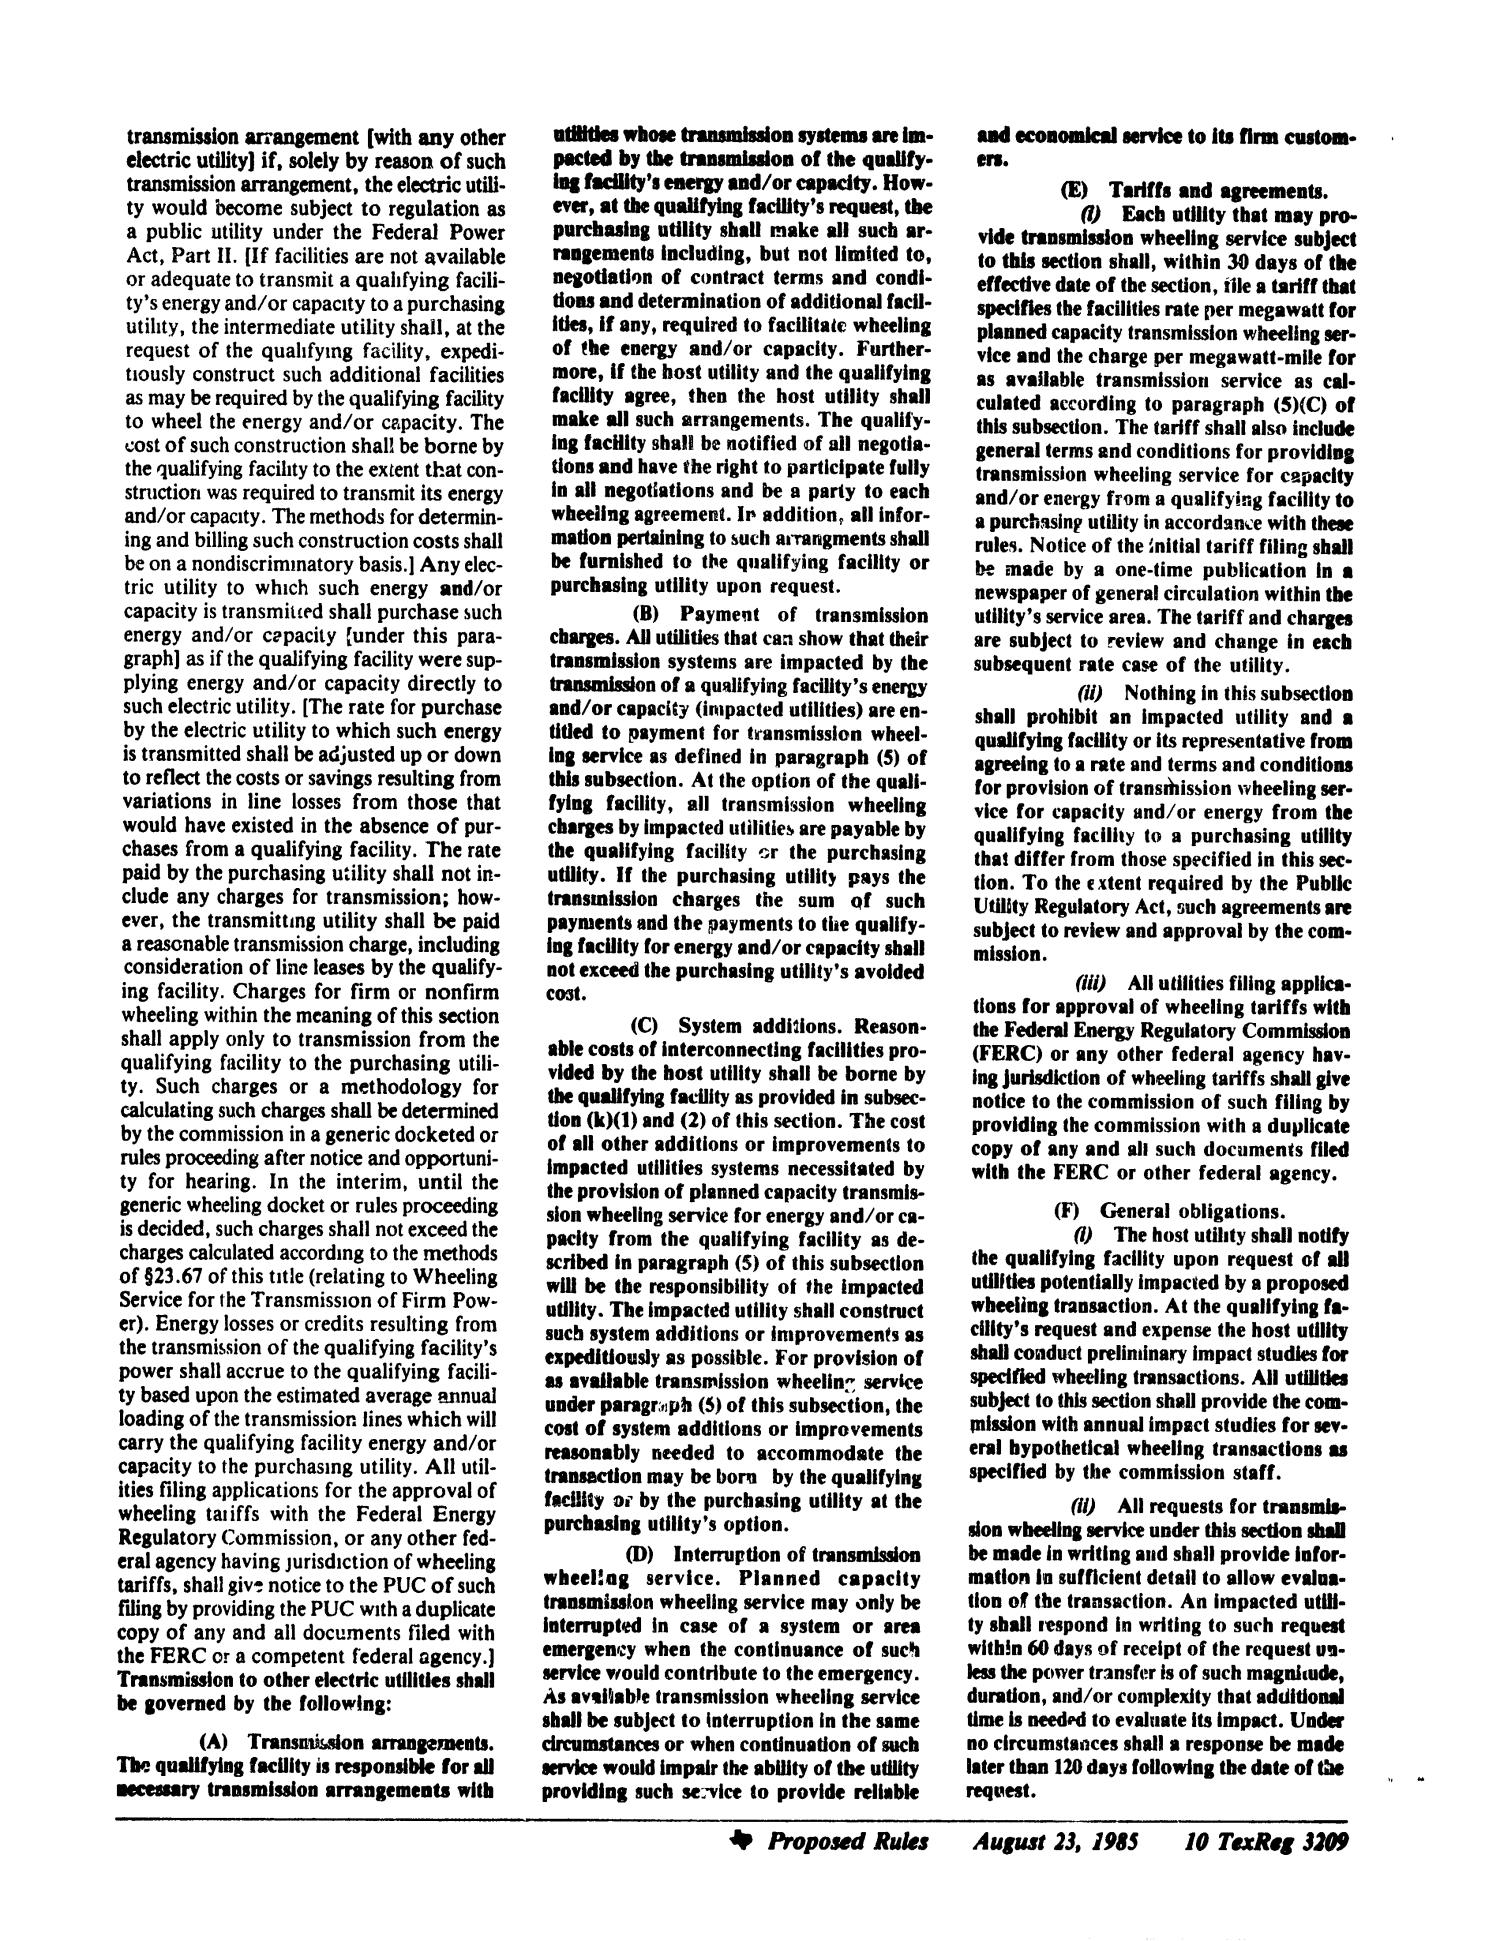 Texas Register, Volume 10, 63, Pages 3197-3236, August 23, 1985
                                                
                                                    3209
                                                